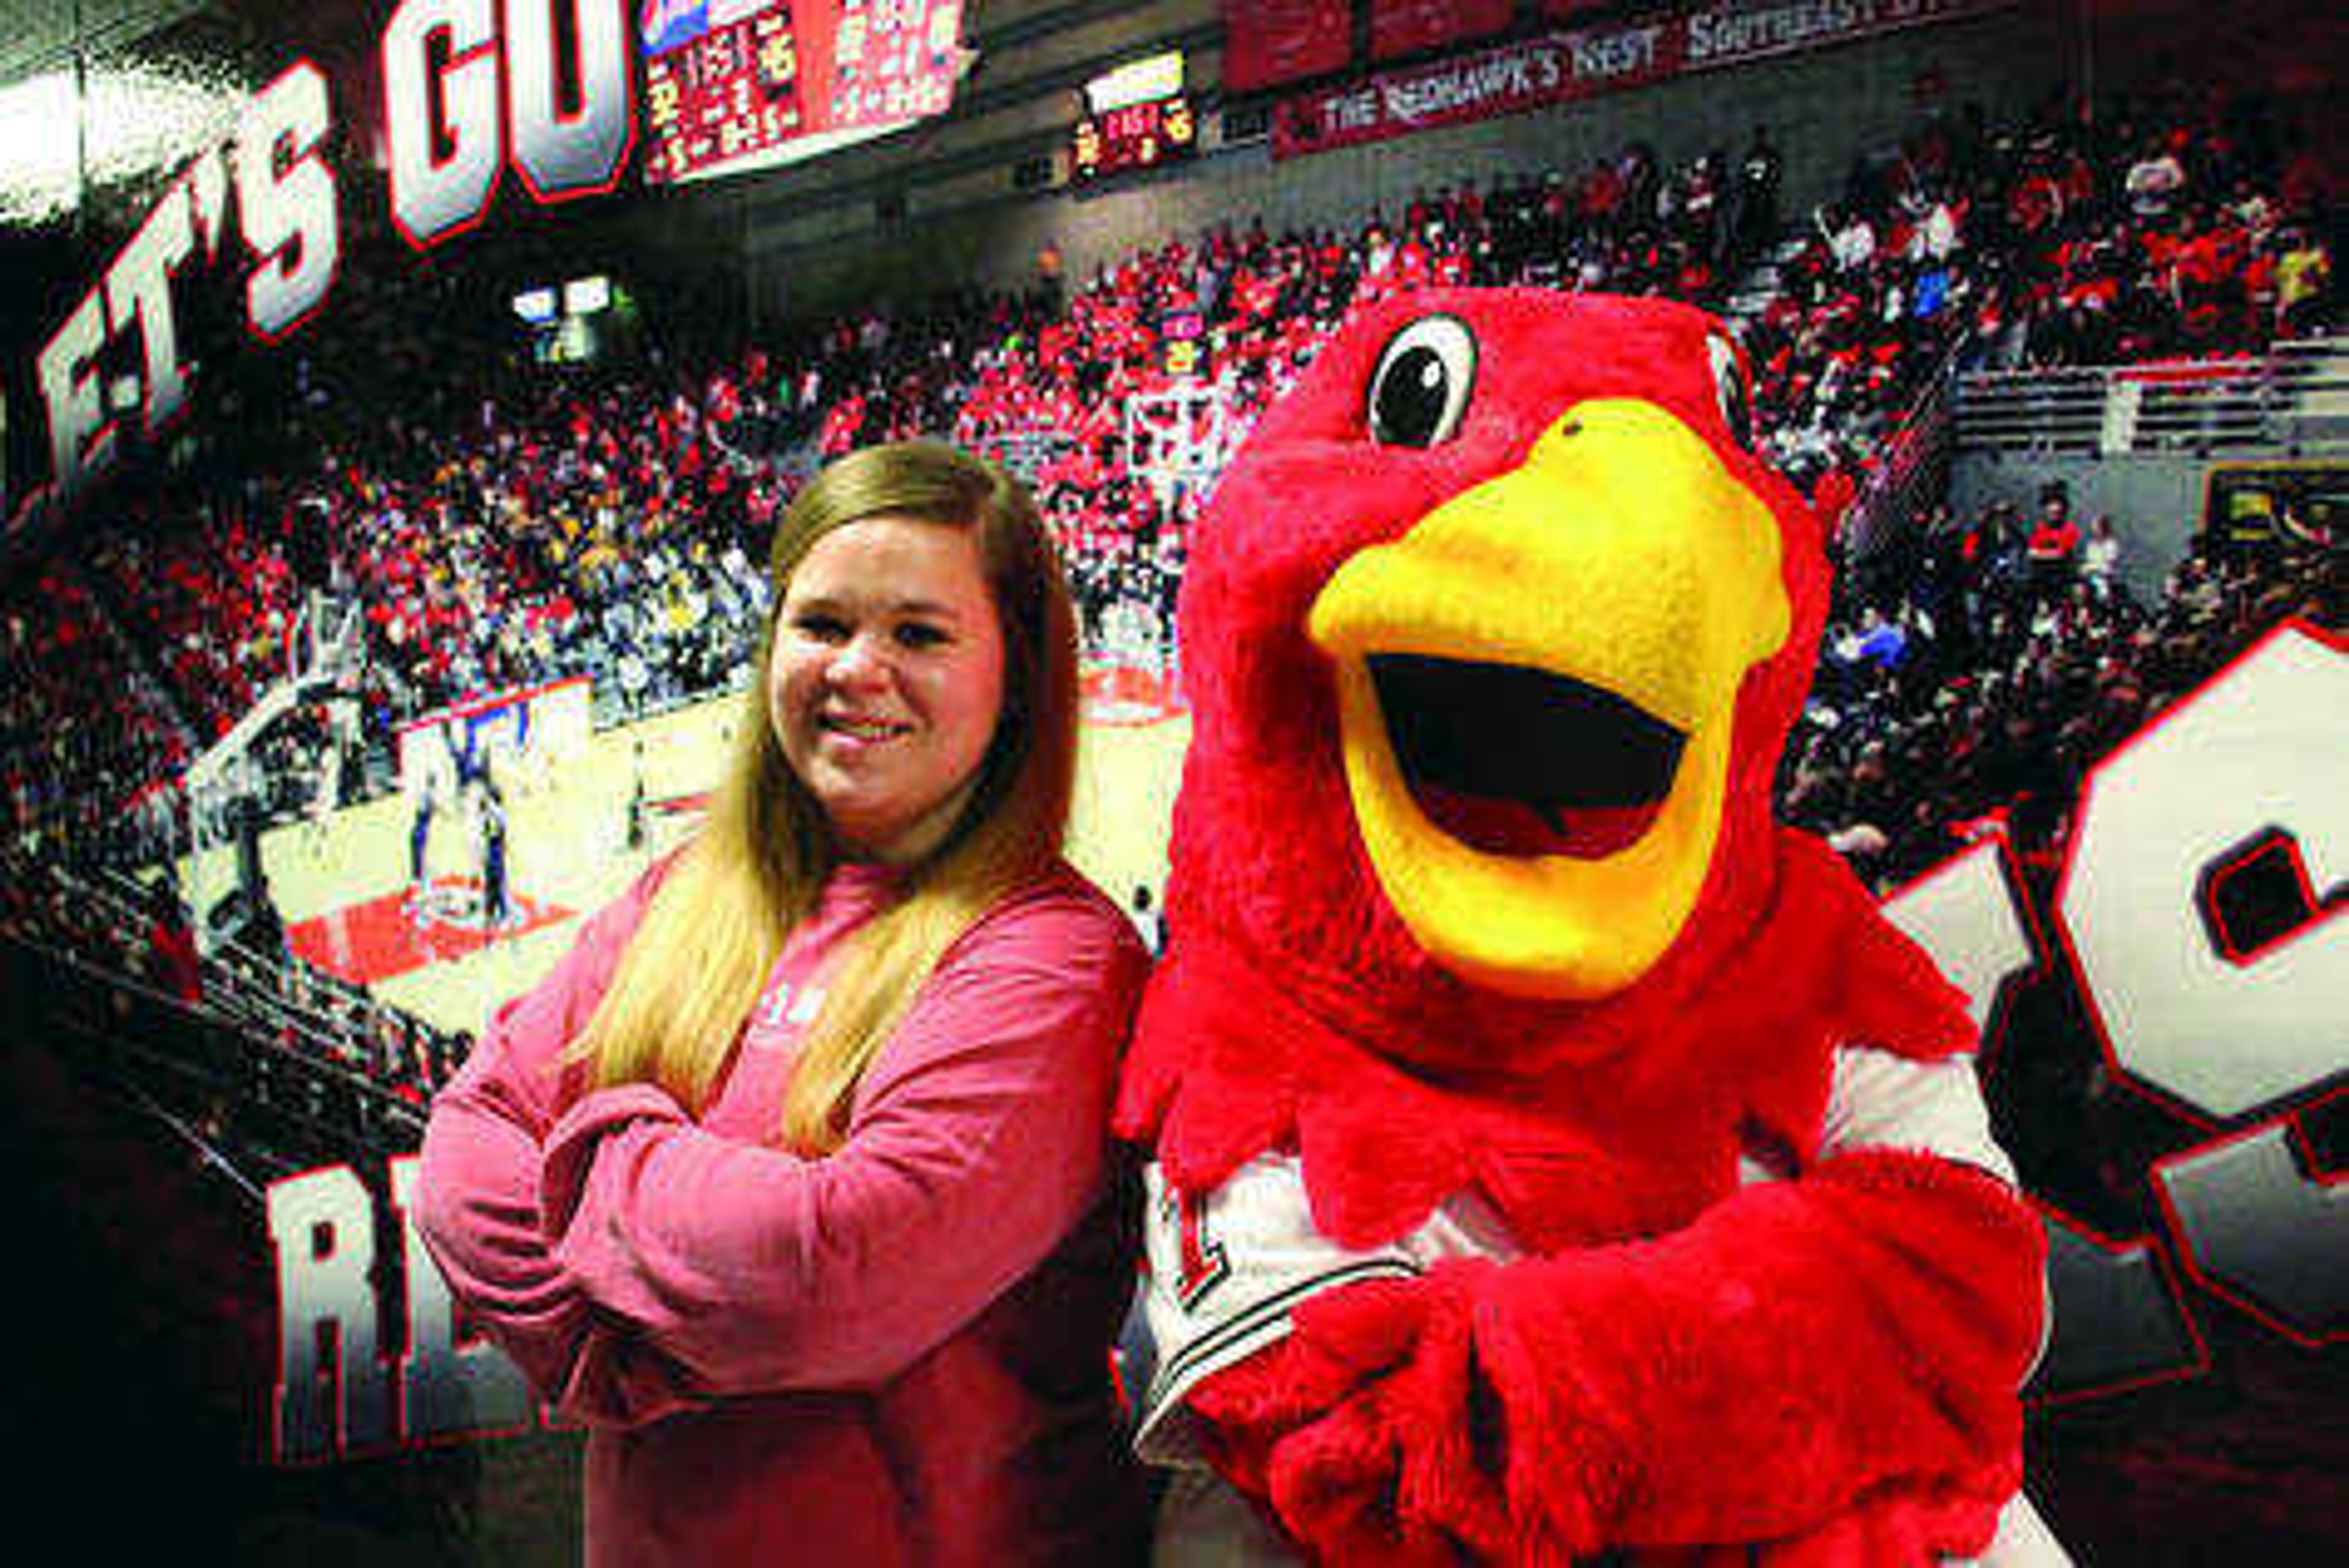 Senior Chelsea Nesbit spent all of her four years at Southeast Missouri State University as one of the three students as Rowdy the Redhawk. Photo by Sean Burke